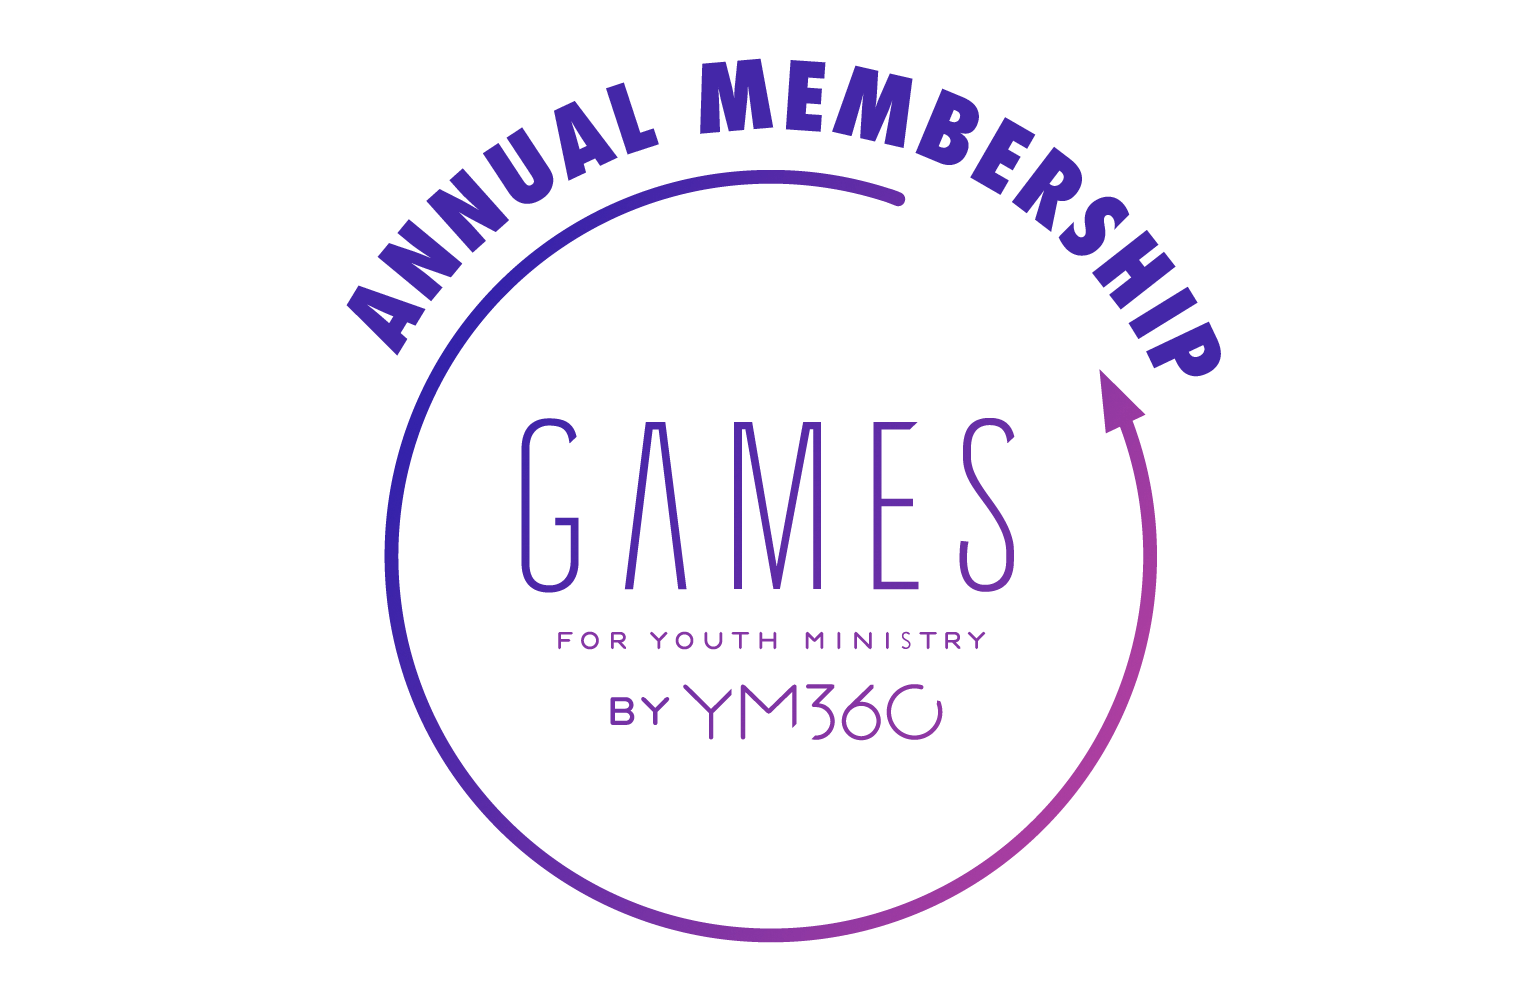 Games for Youth Ministry Annual Membership